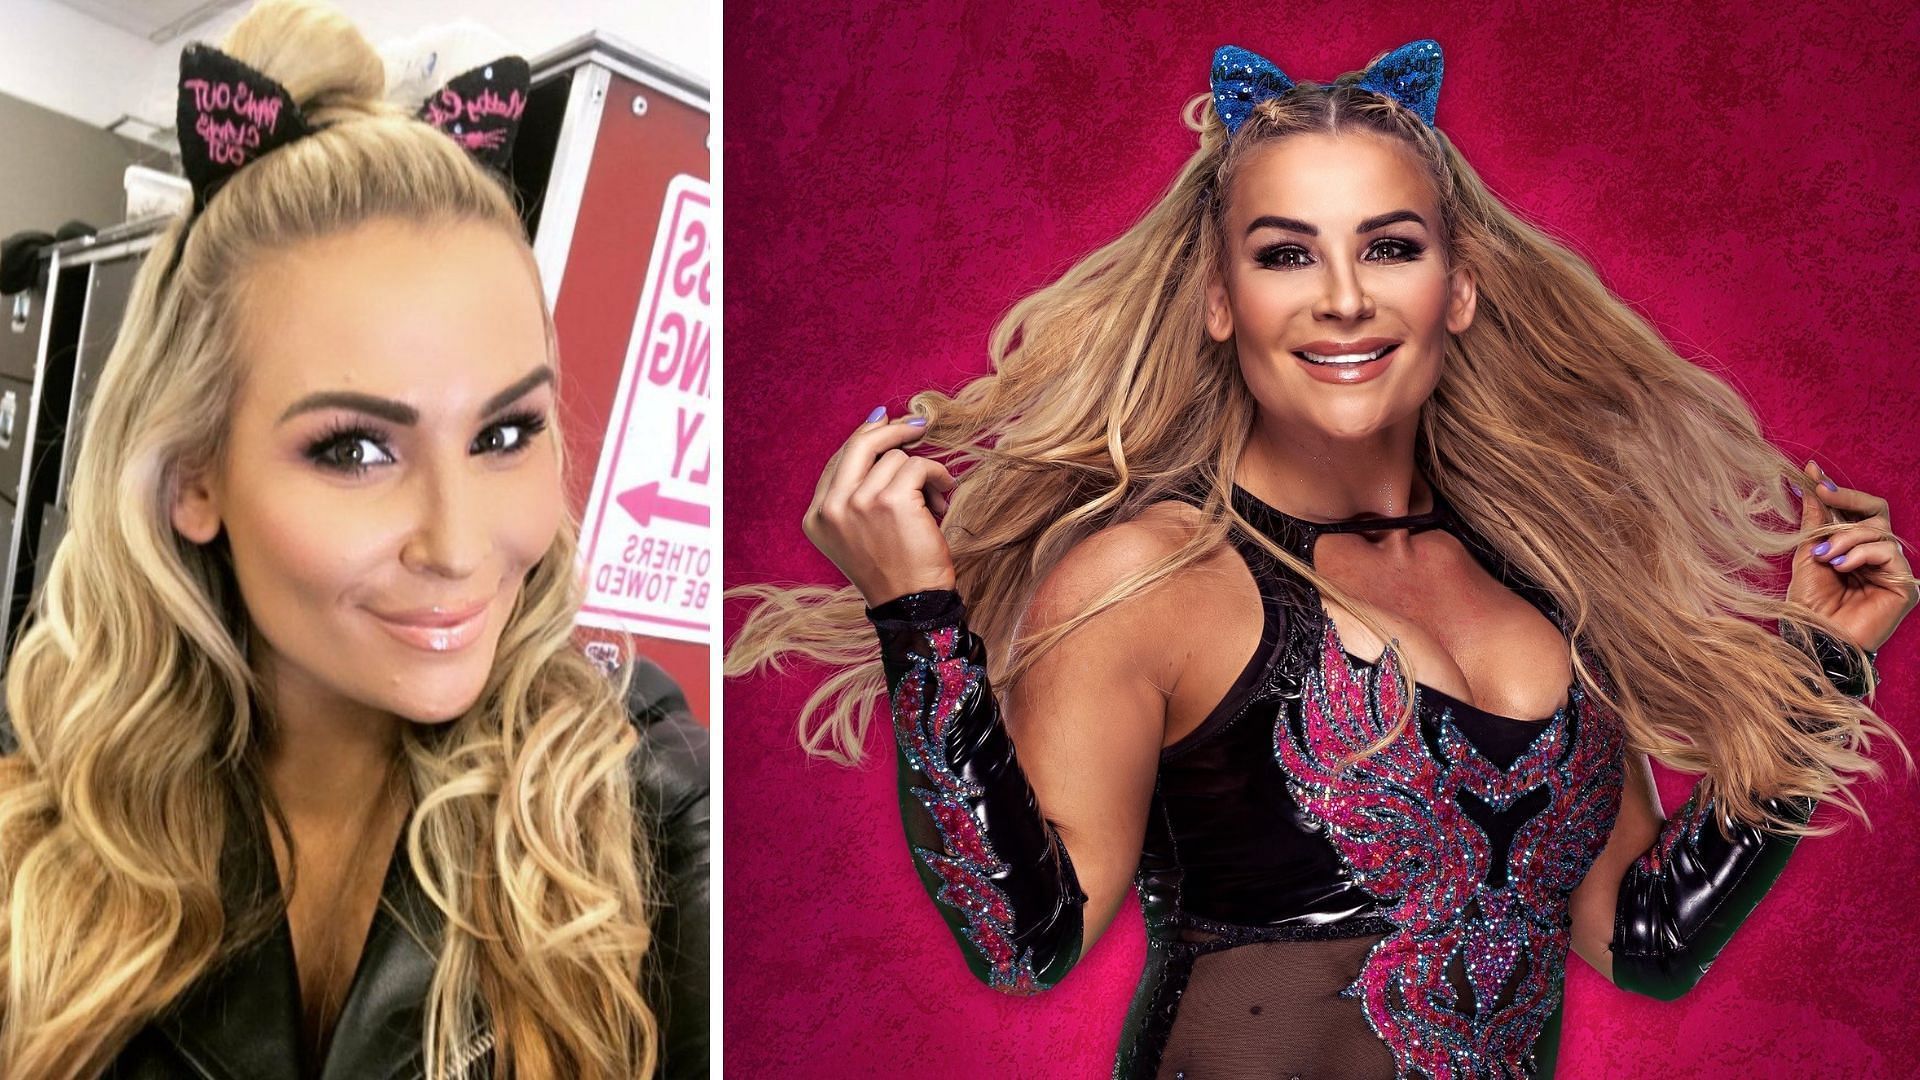 Natalya is currently on the WWE SmackDown roster.